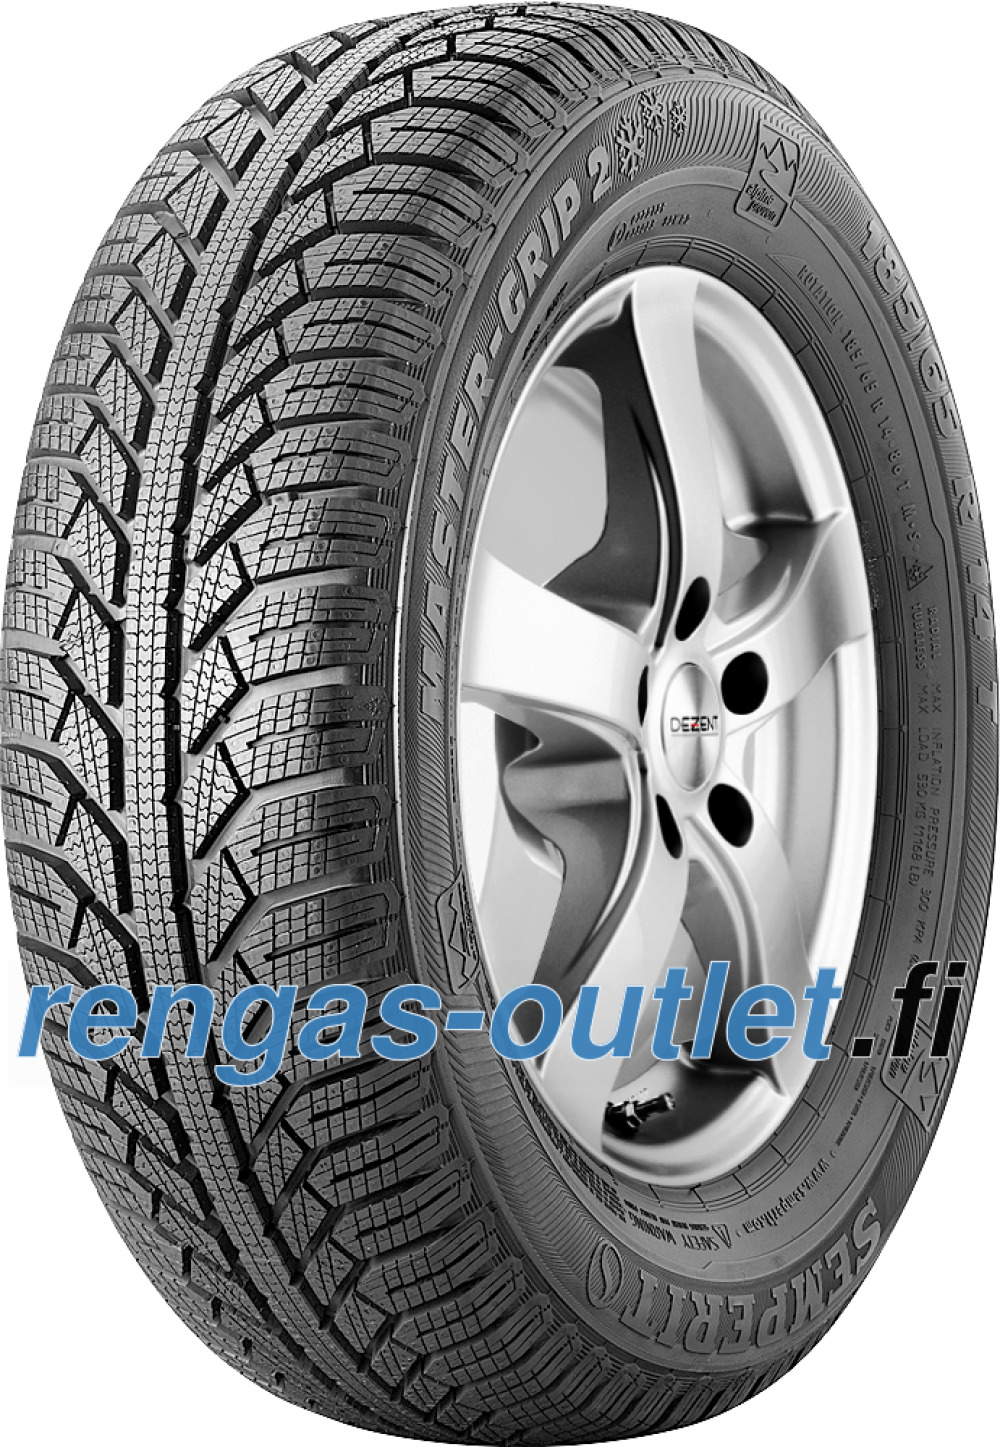 Basic theory Borrow fell Semperit Master-Grip 2 175/65 R14 82T - rengas-outlet.fi